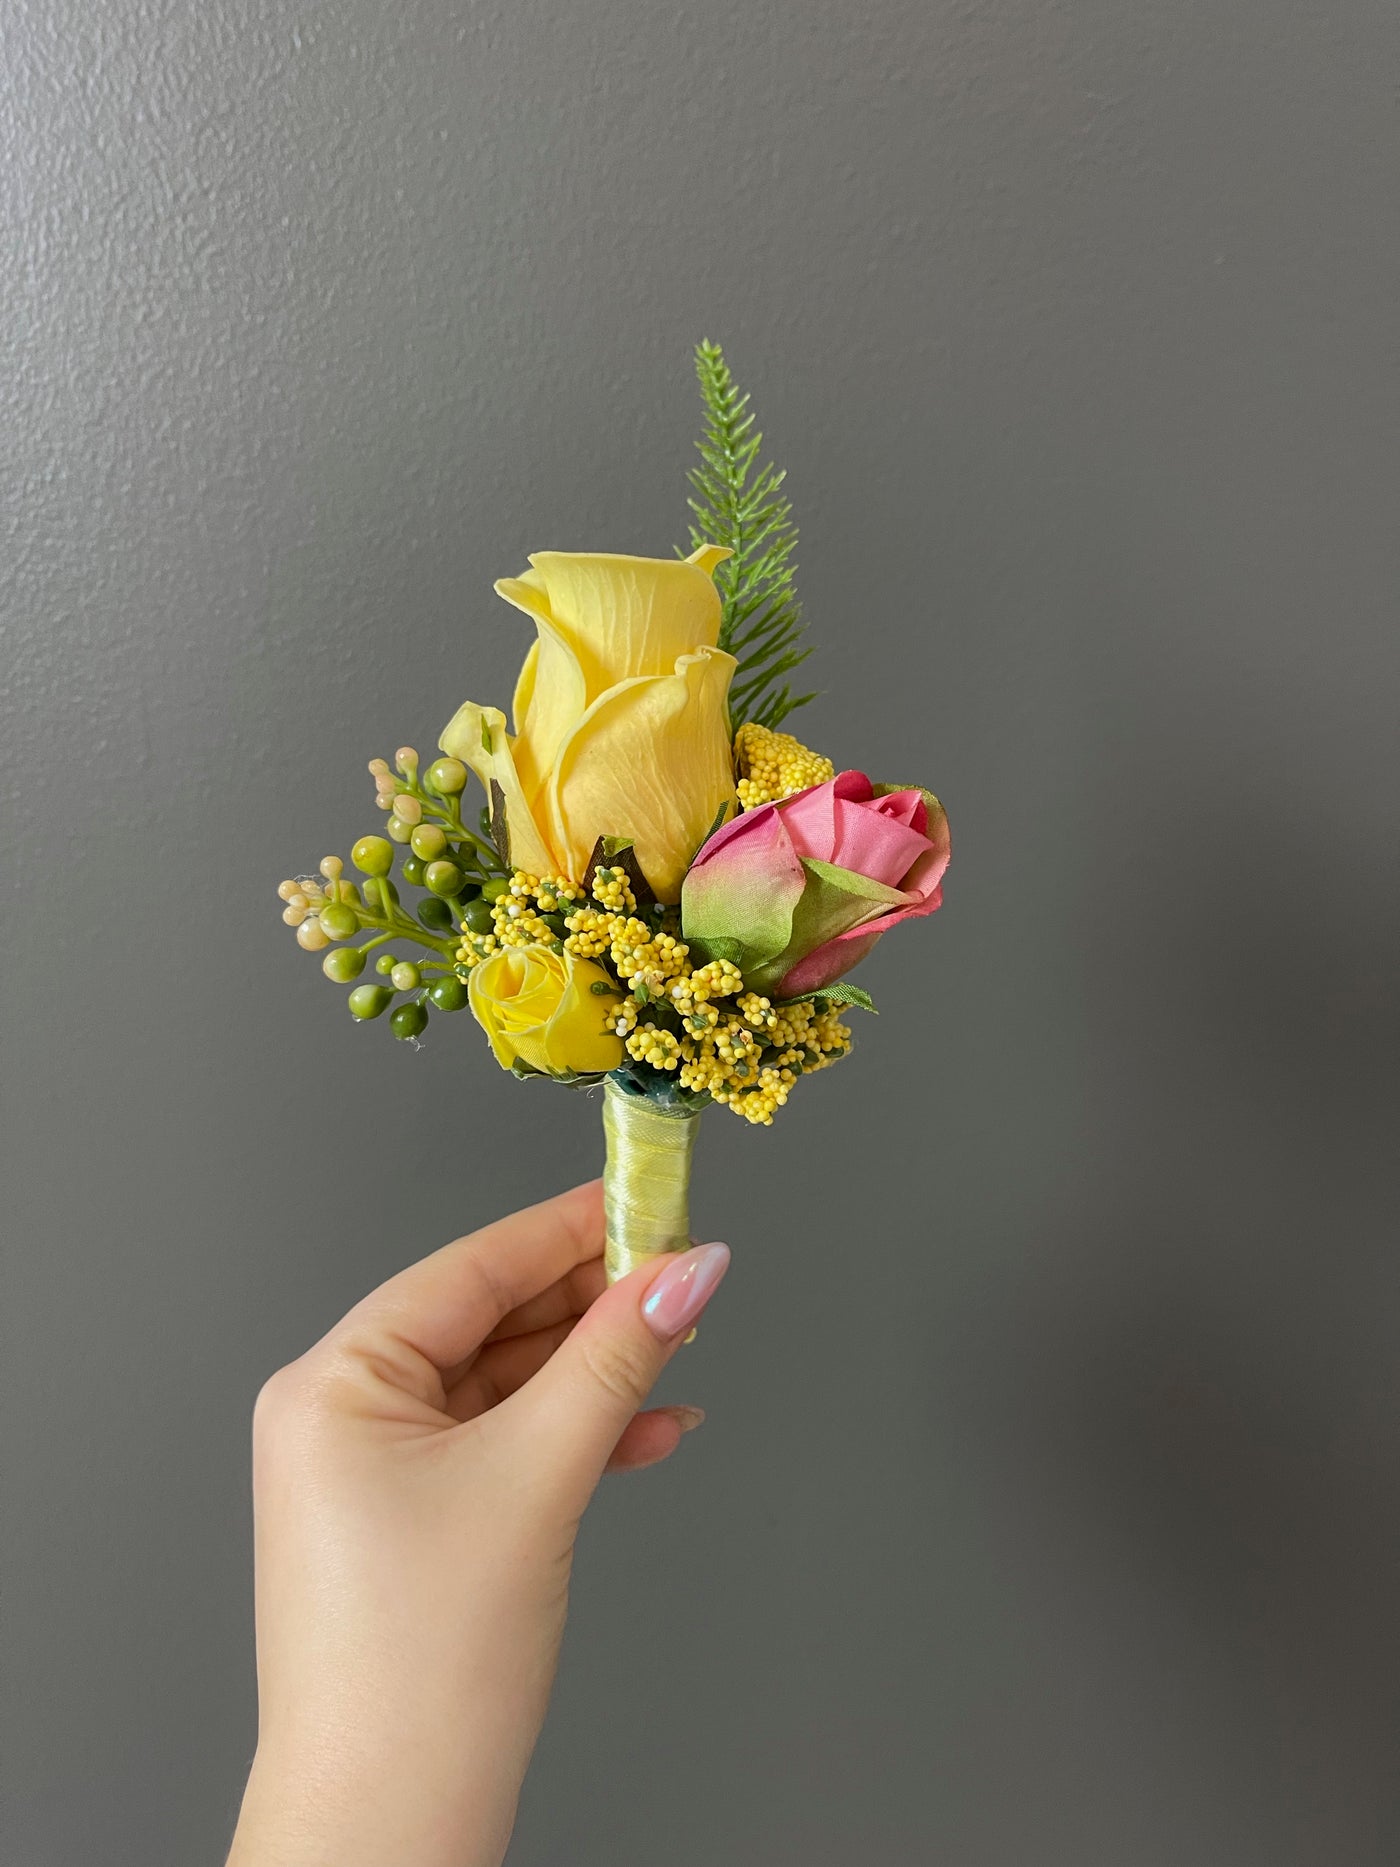 This 6" yellow boutonniere features yellow and pink roses, and delicate foliage, secured with a yellow satin ribbon.